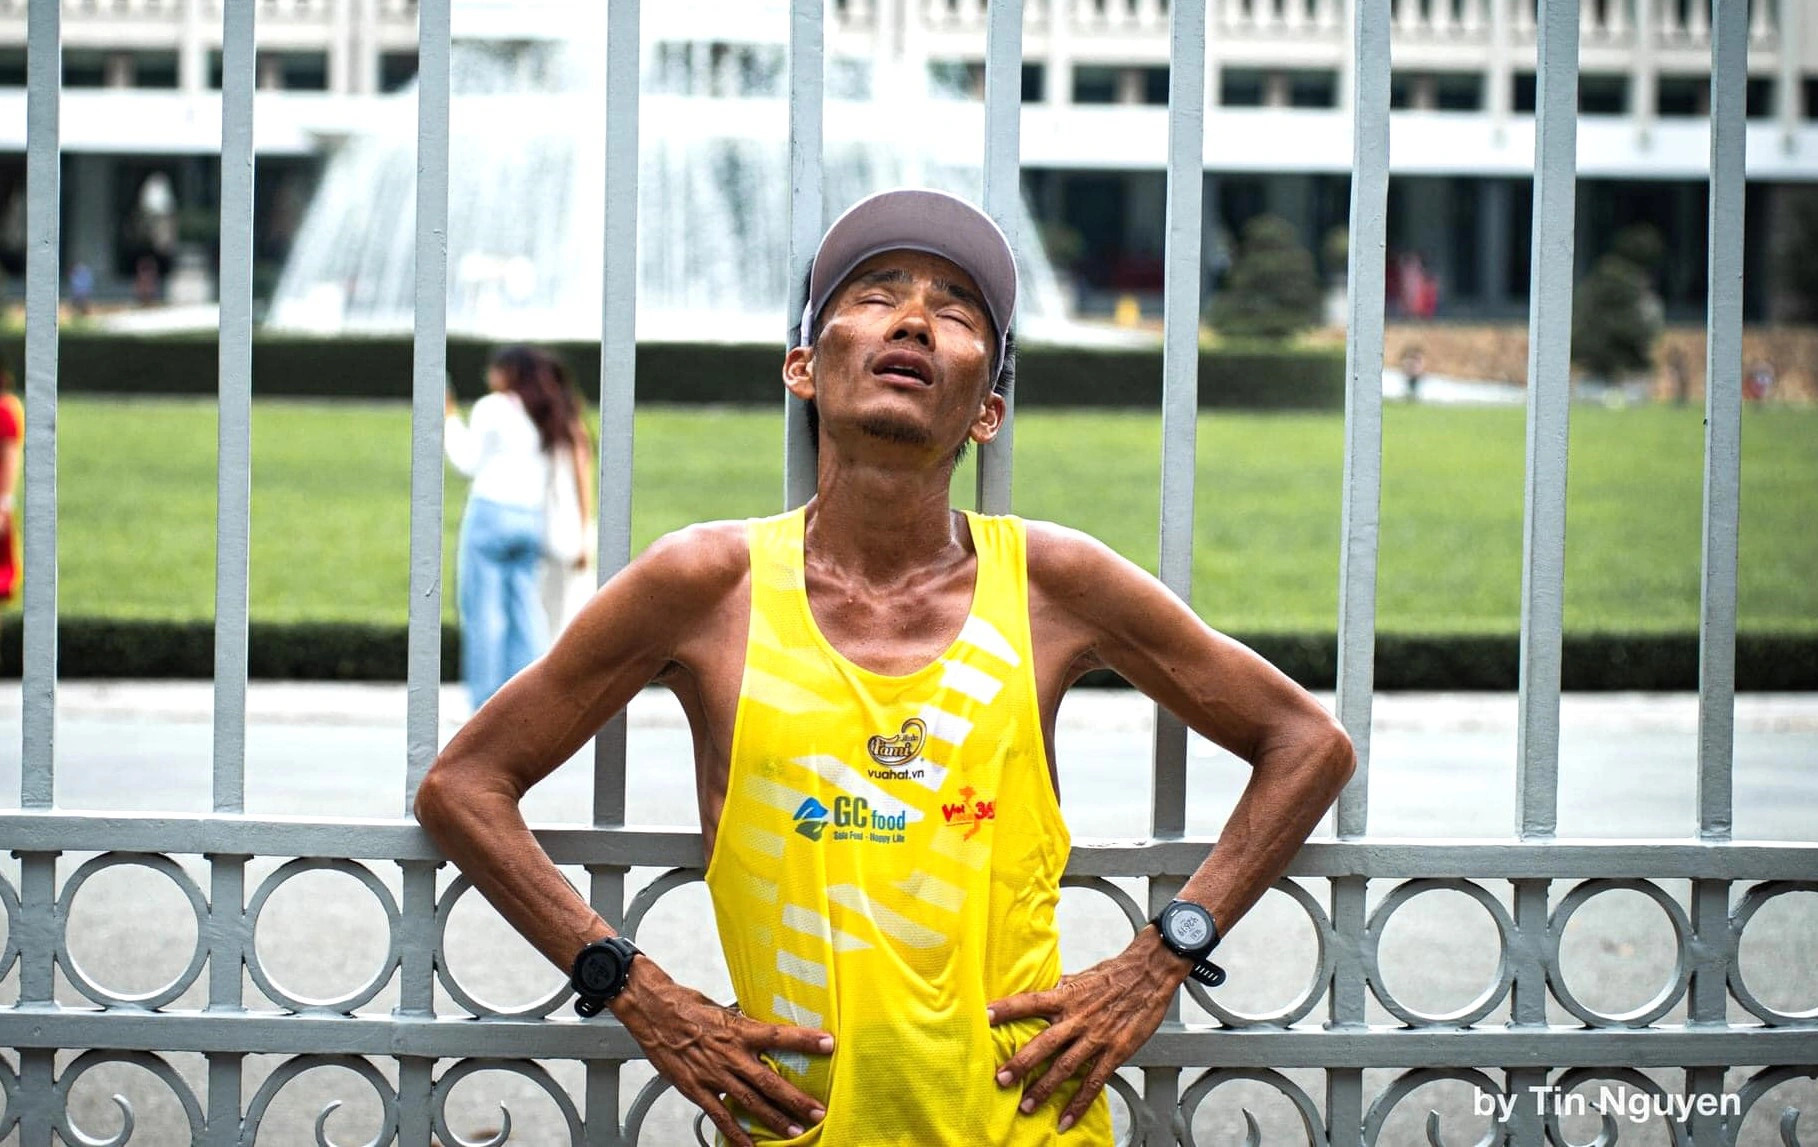 Nguyen Van Long raised funds worth VND400 million (US$16,370) to support disadvantaged children during his solo marathon across Vietnam in 2022. Photo: Supplied